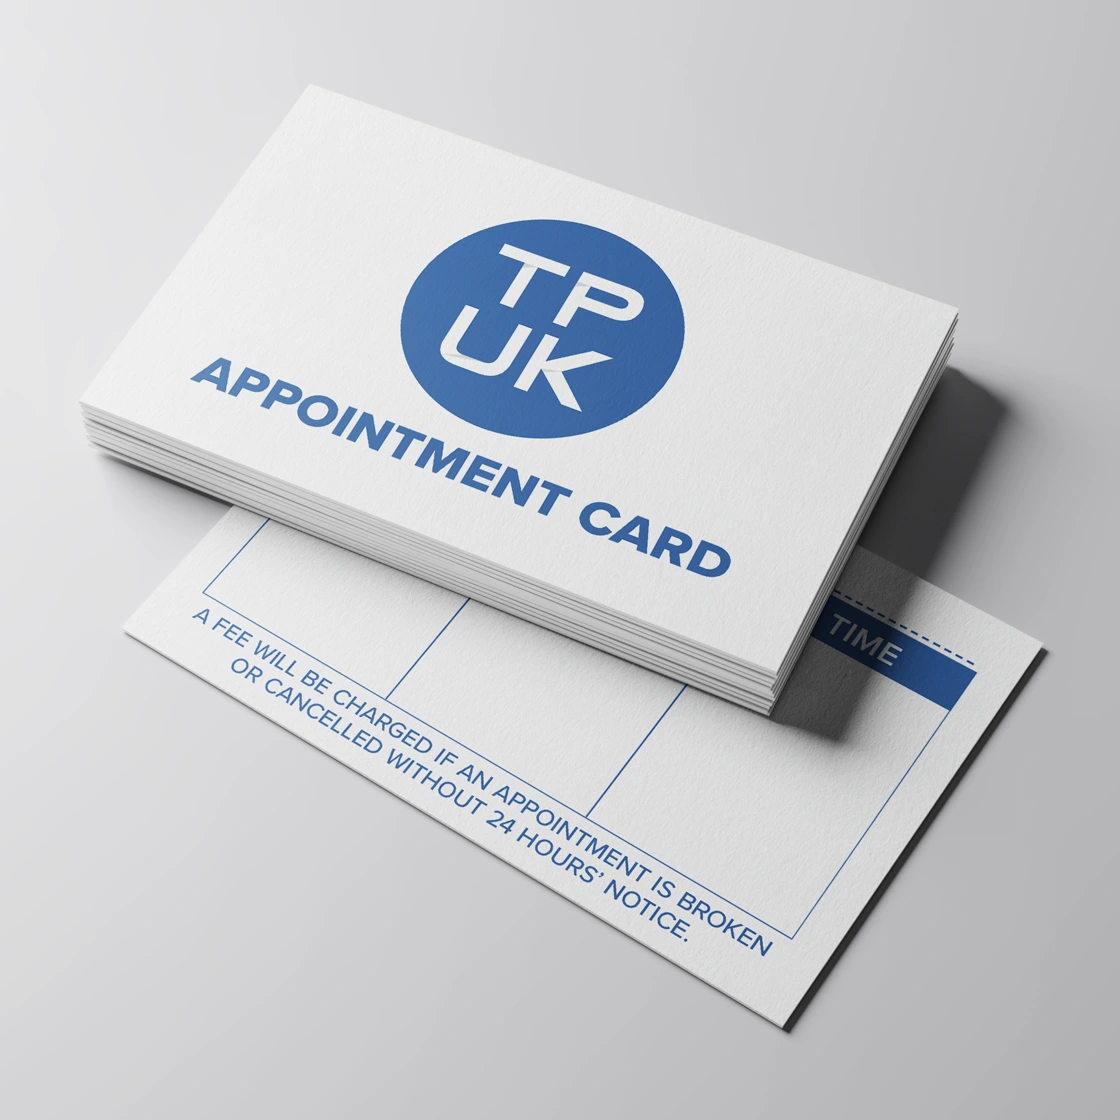 Custom Printed Appointment Cards from TradePrintingUK